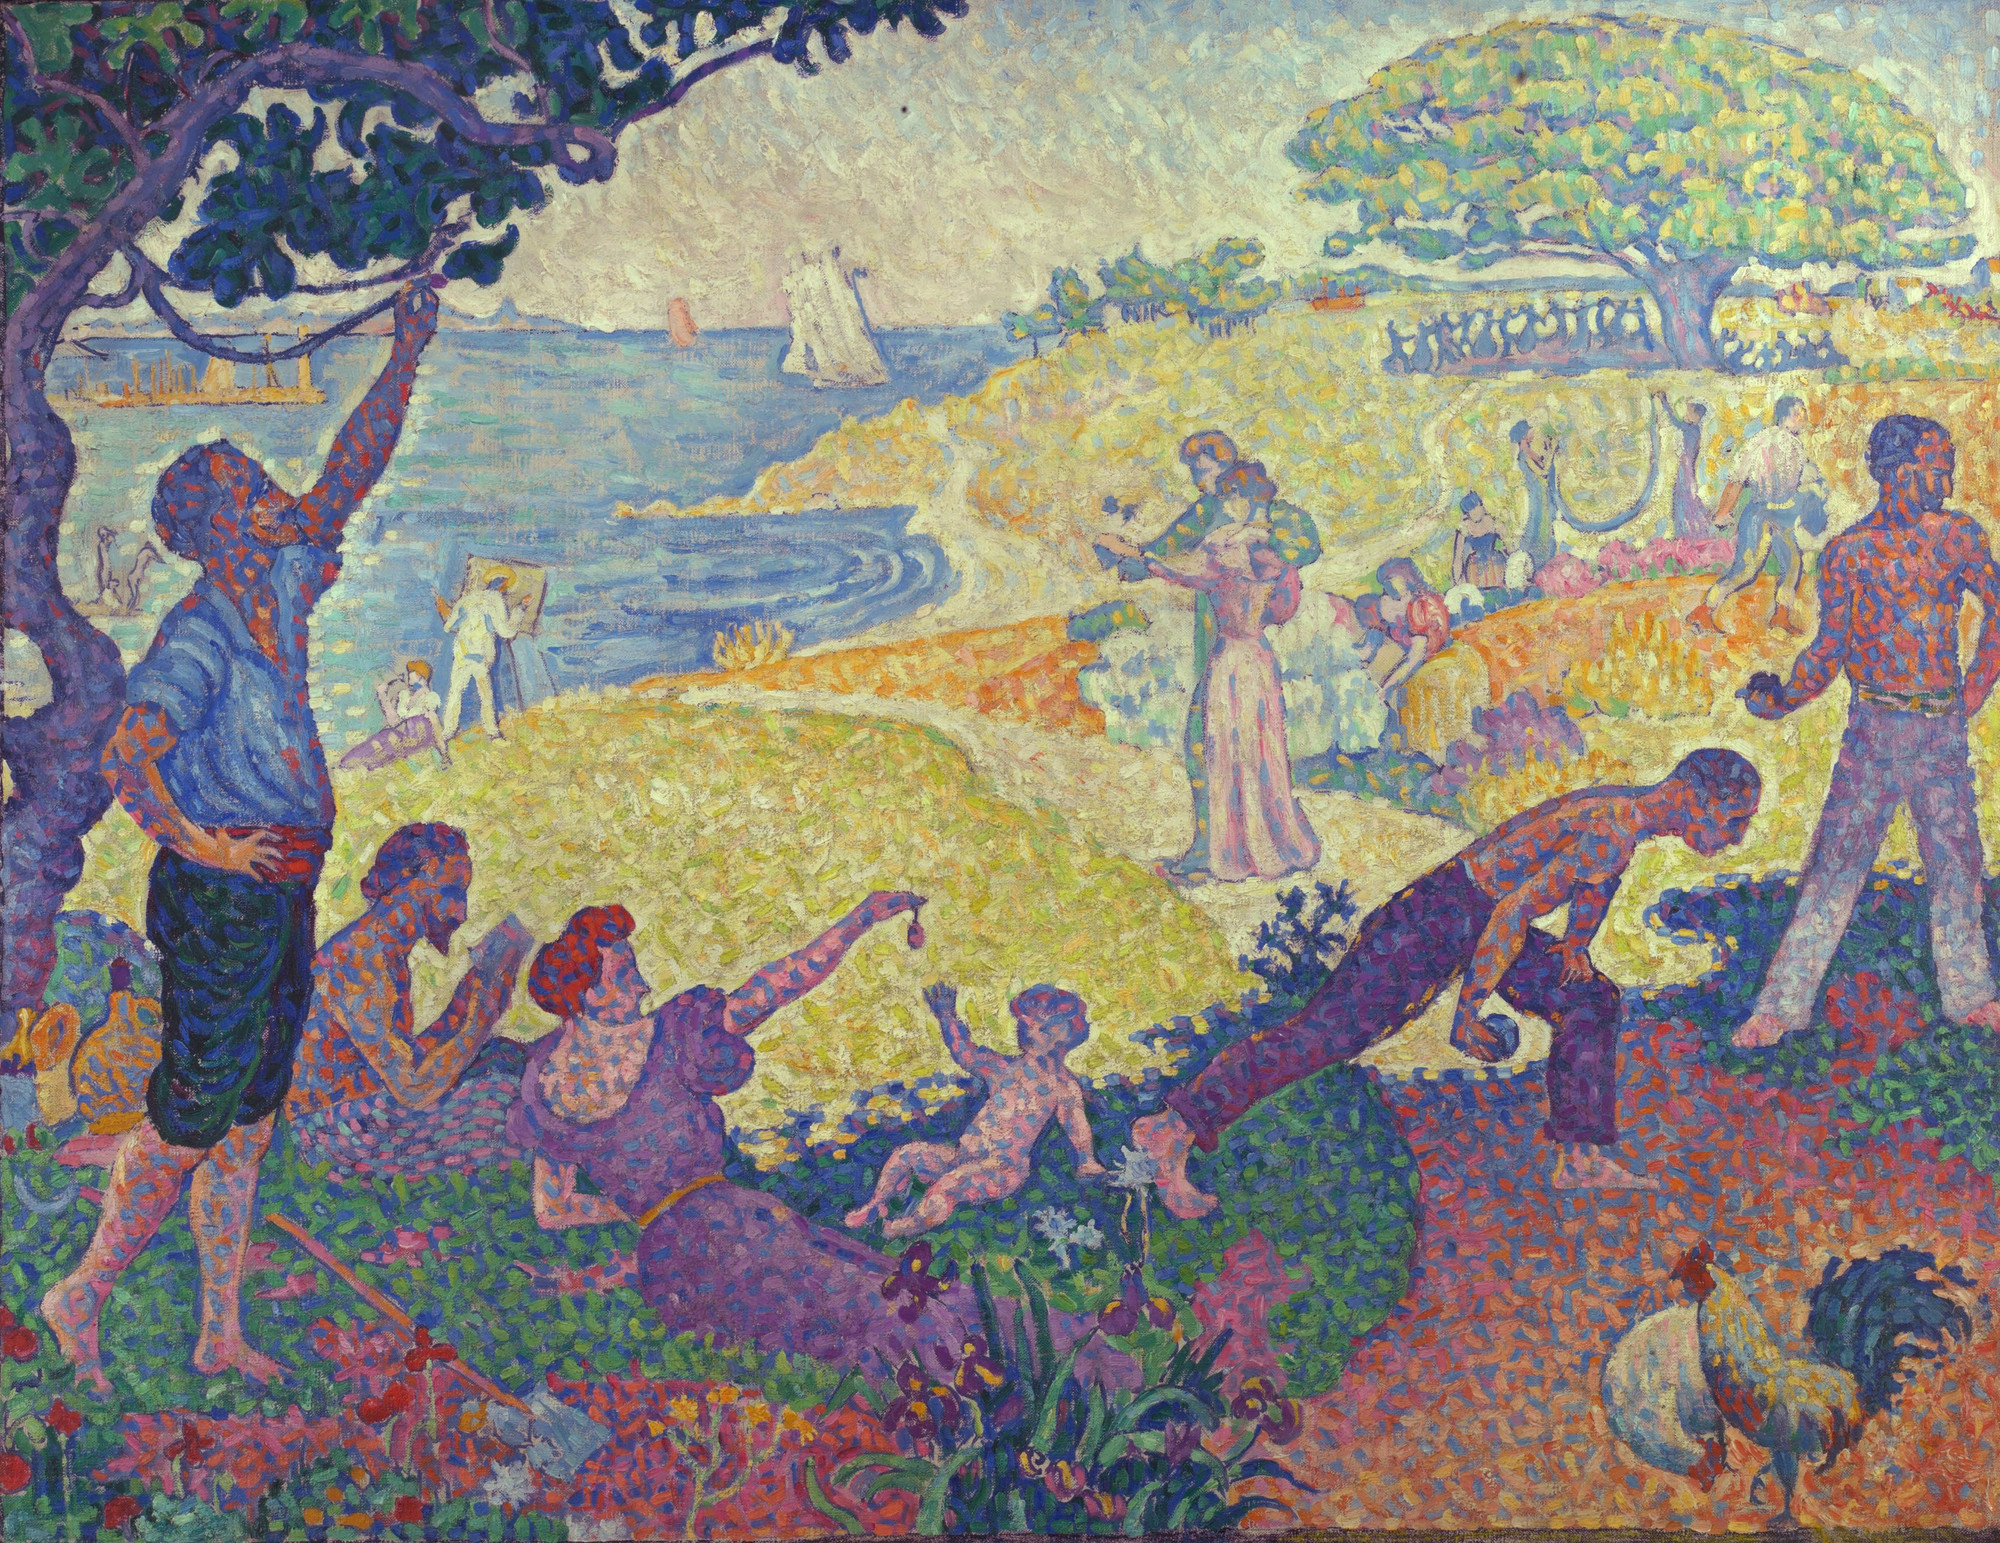 Paul Signac. _In the Time of Harmony: The Golden Age Has Not Passed, It Is Still to Come (Reprise)_. 1896. Oil on canvas. 25 9/16 × 31 7/8" (65 × 81 cm). The Kasser Mochary Foundation, Montclair, New Jersey. © Kasser Mochary Foundation / Photo: Nikolai Dobrowolskij © 2020 Artists Rights Society (ARS), New York / ADAGP, Paris